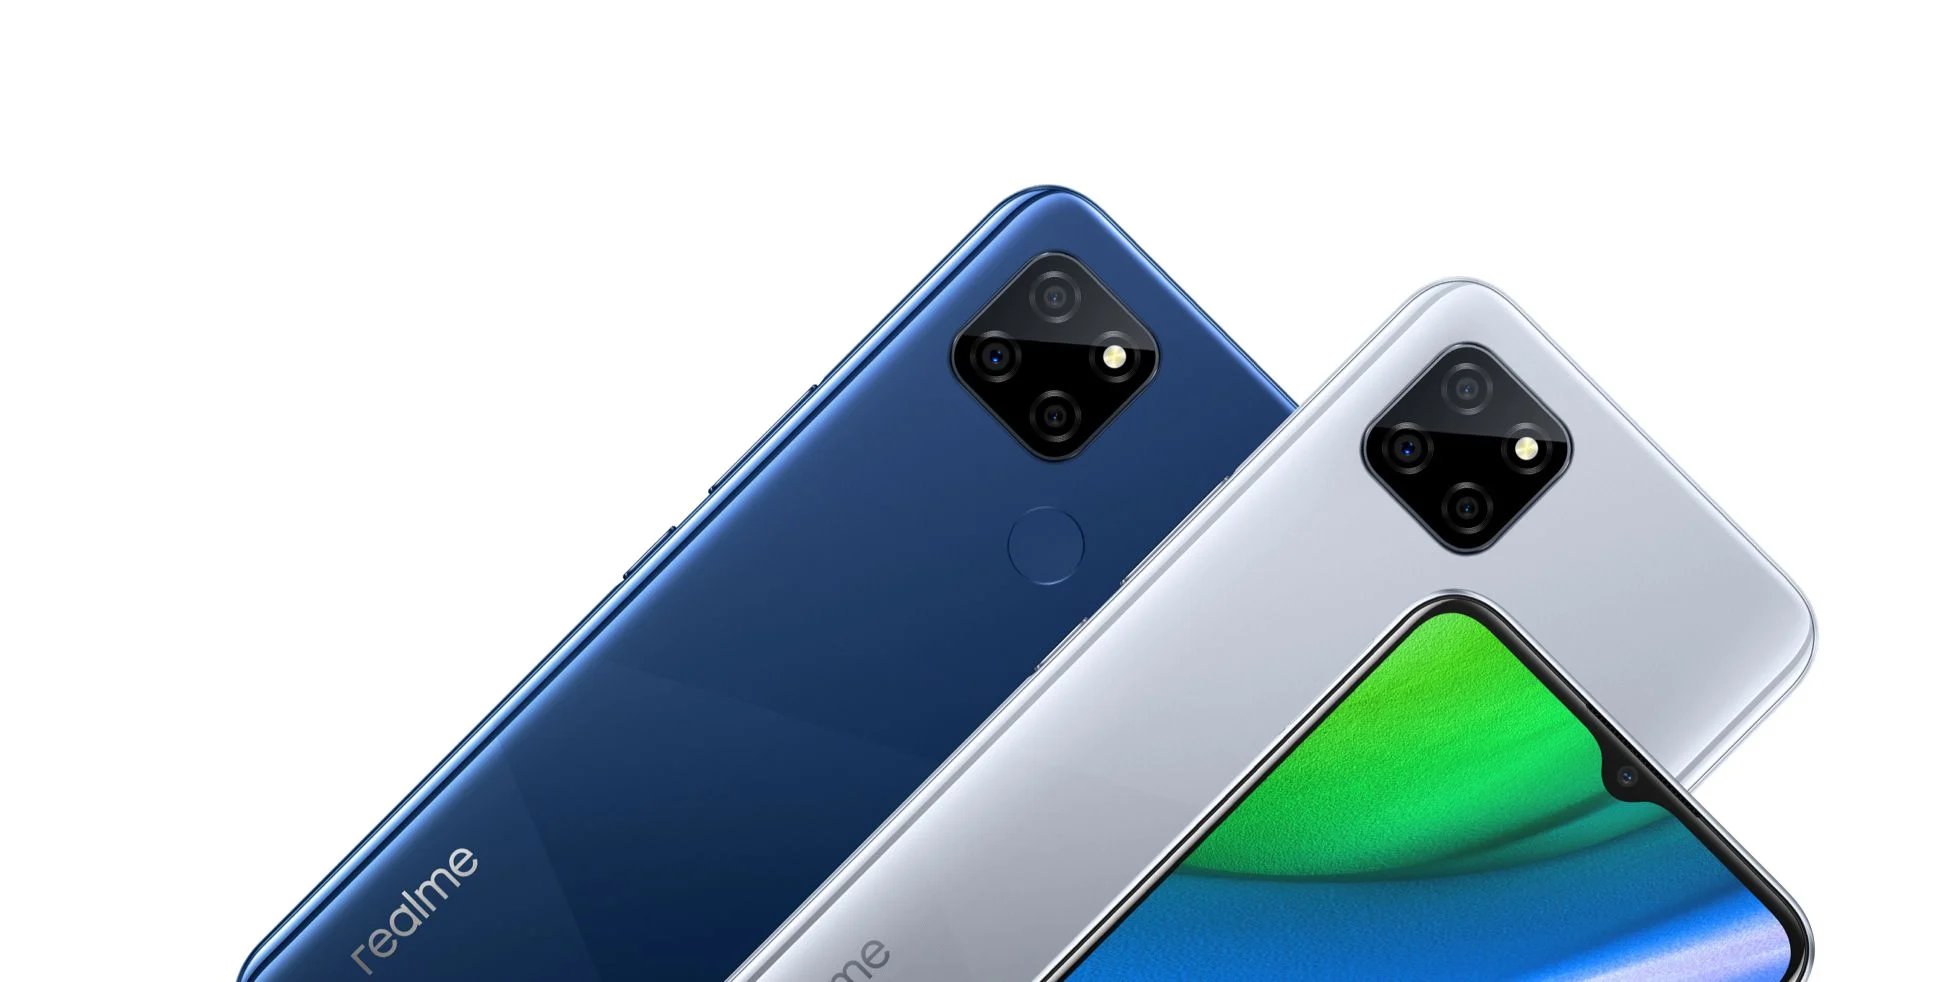 realme-v3-5g-debuts-as-the-worlds-cheapest-5g-smartphone-price-starting-at-cny-999